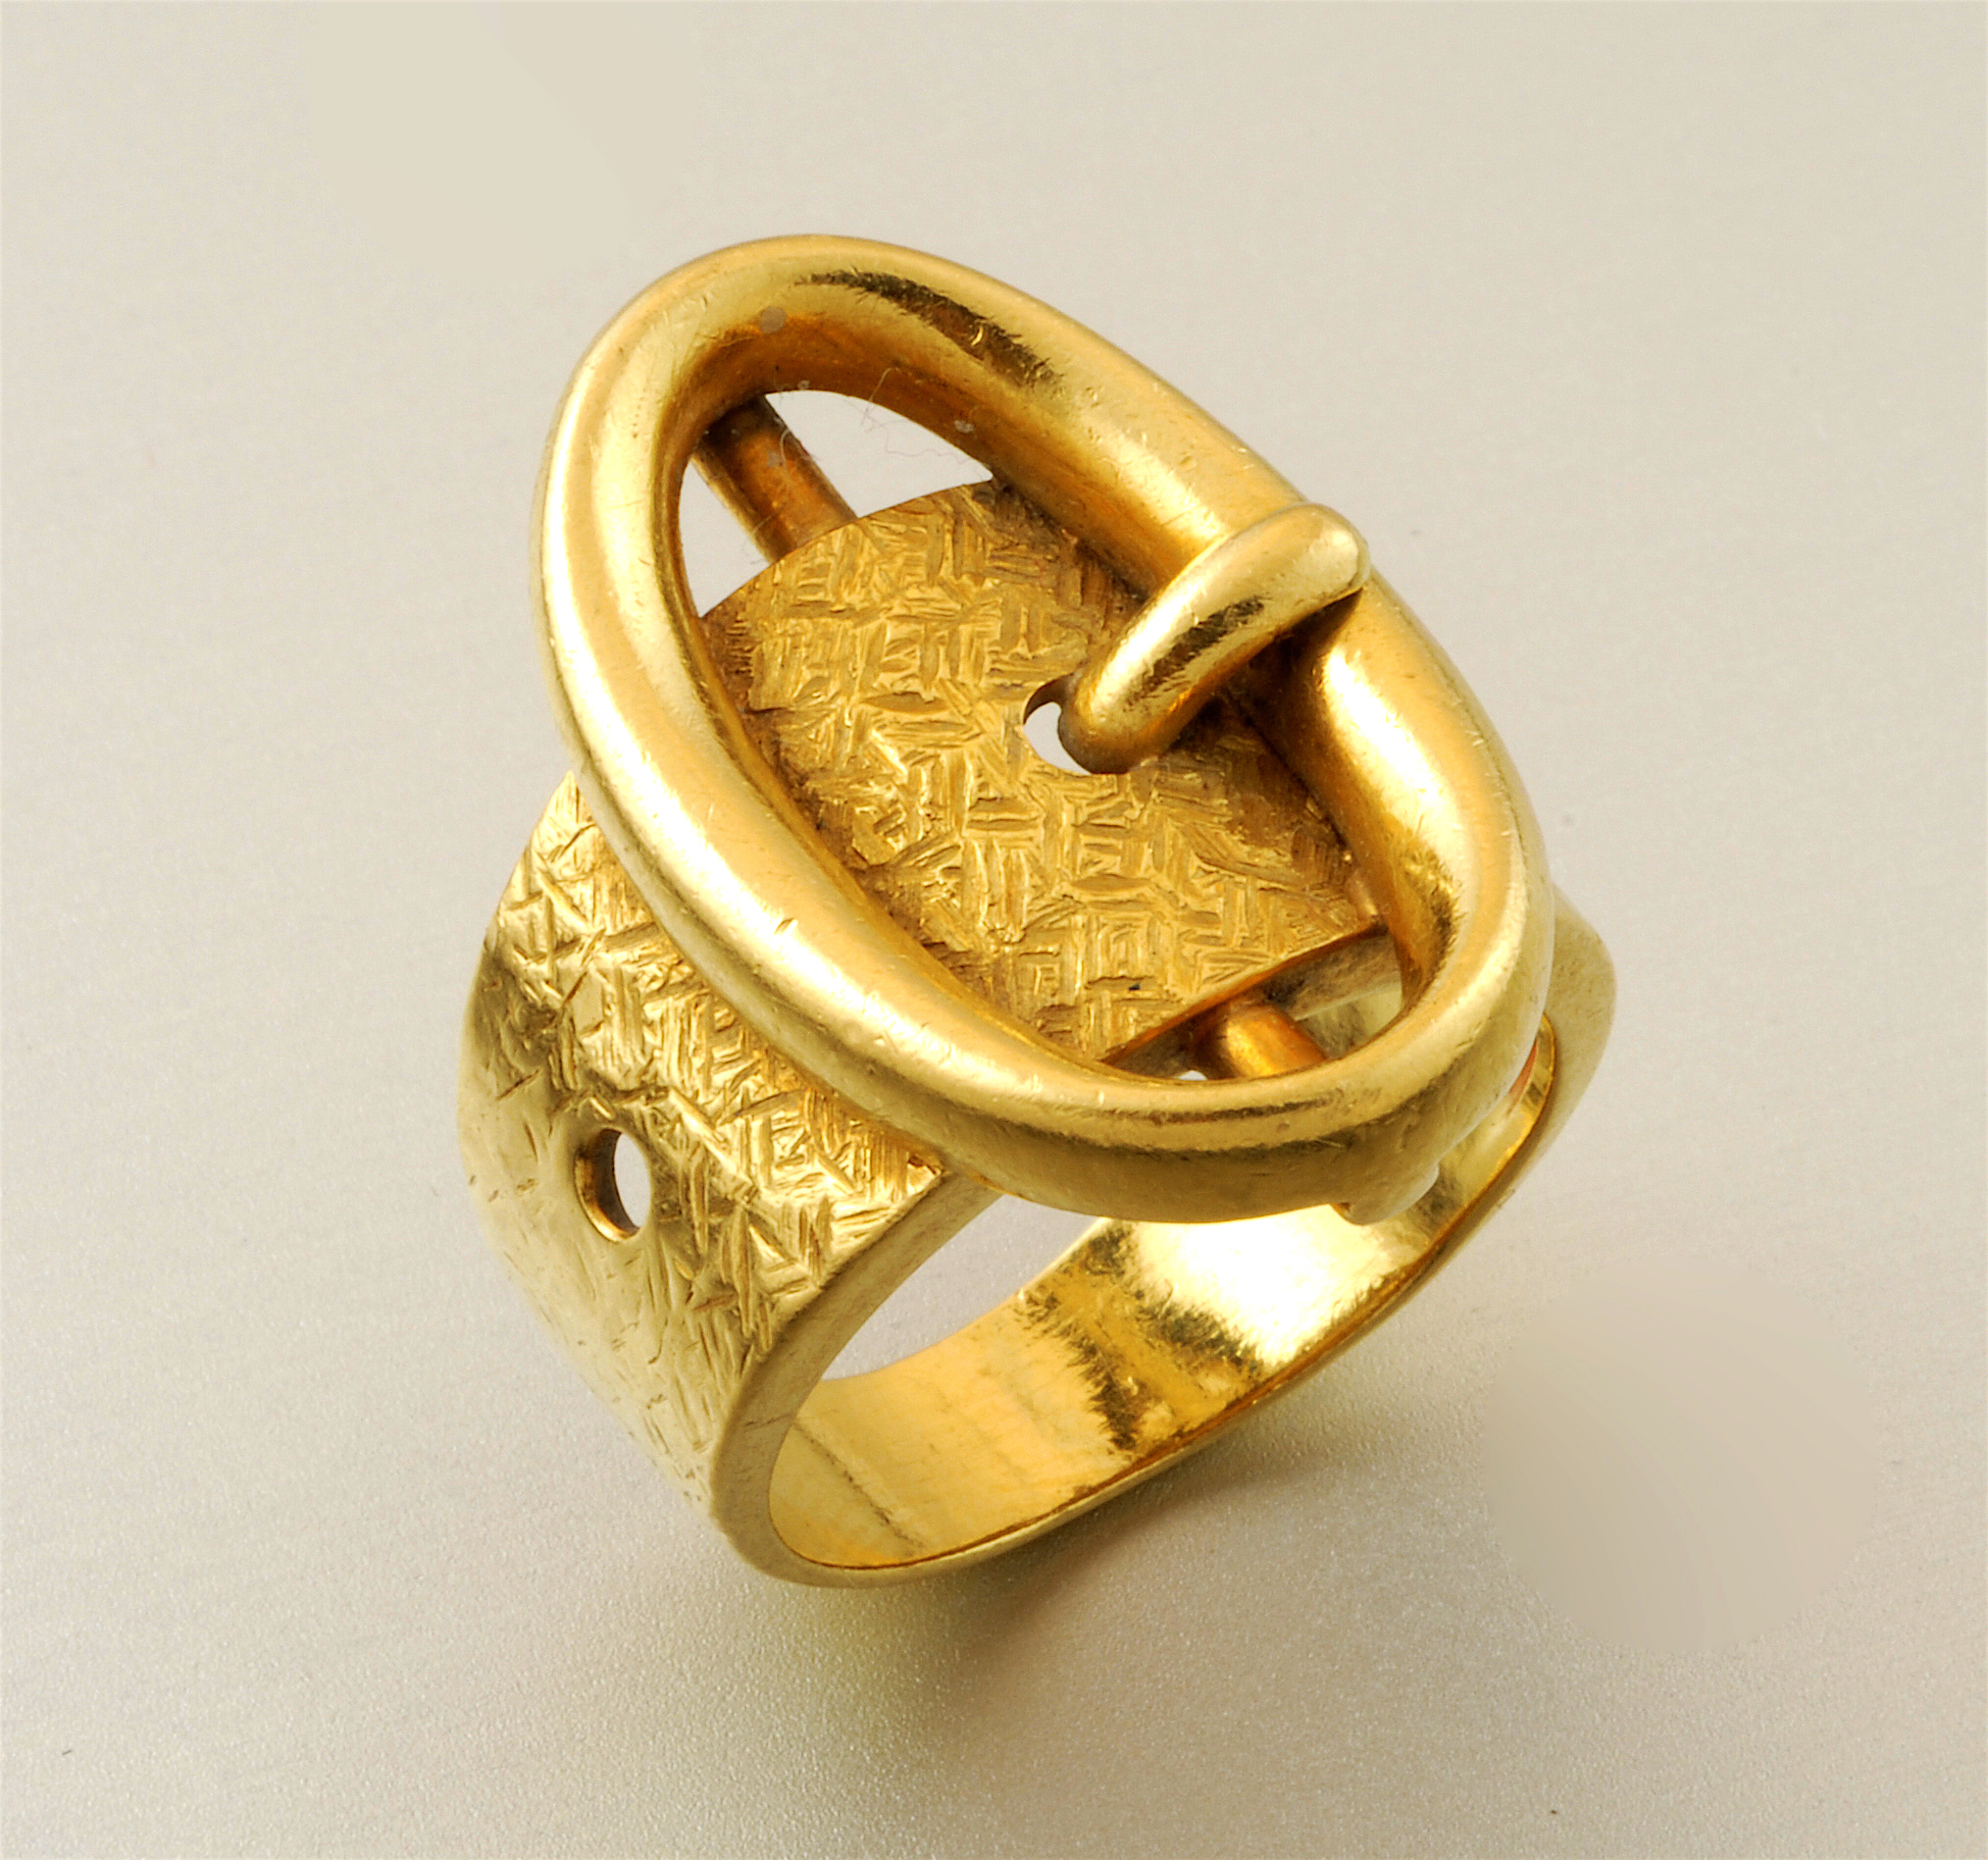 Italian Retro oval “Buckle” ring, 18K gold with a Florentine finish, marked, c. 1940’s